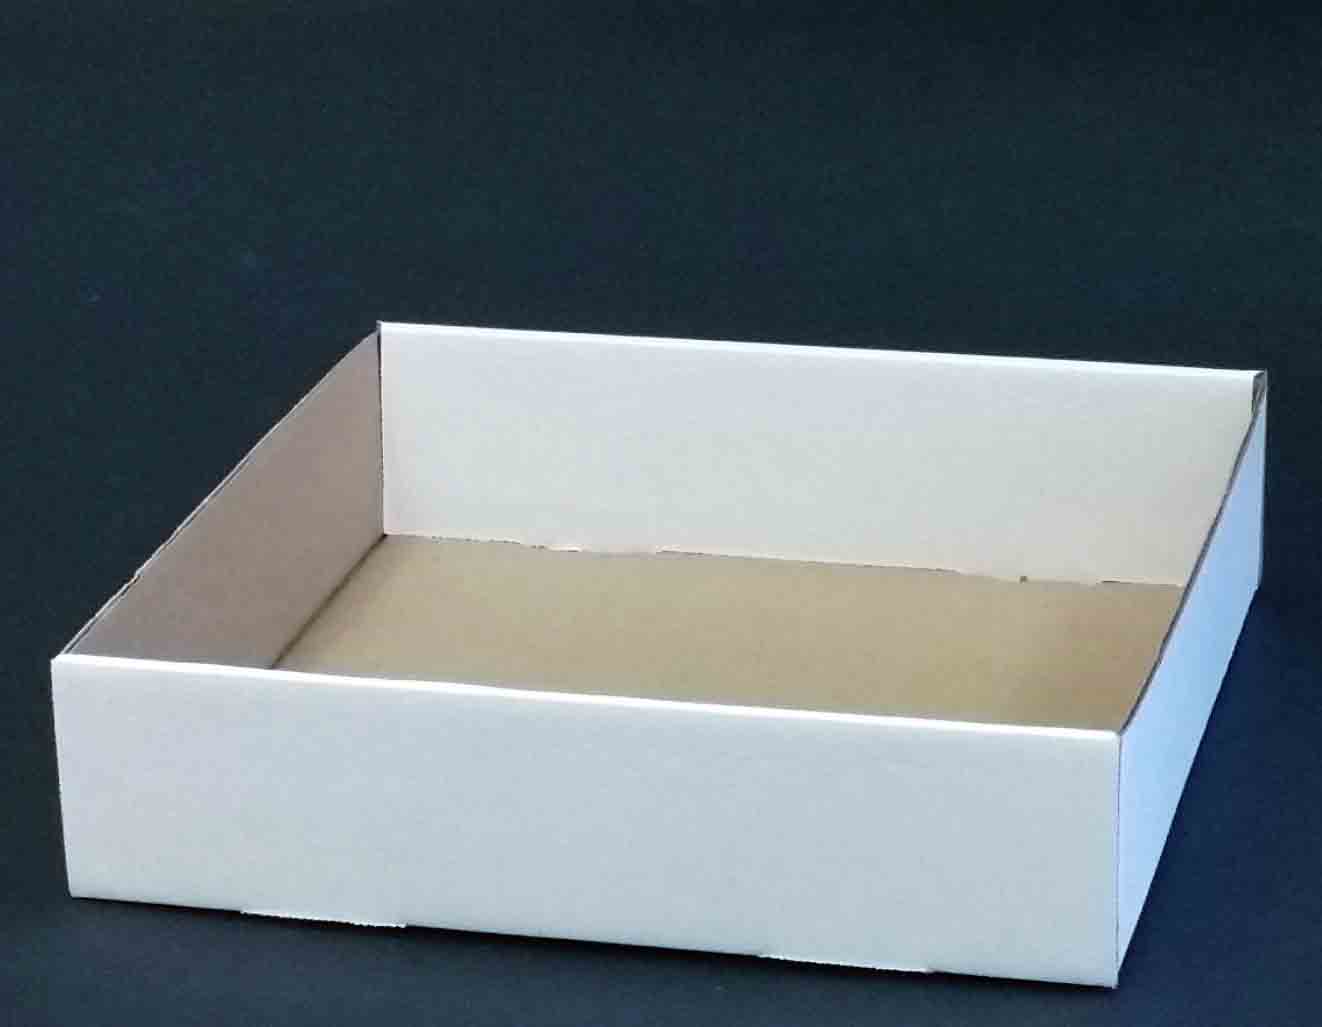 722 - 12 x 12 x 3" Delivery Tray - 52.40 bdle